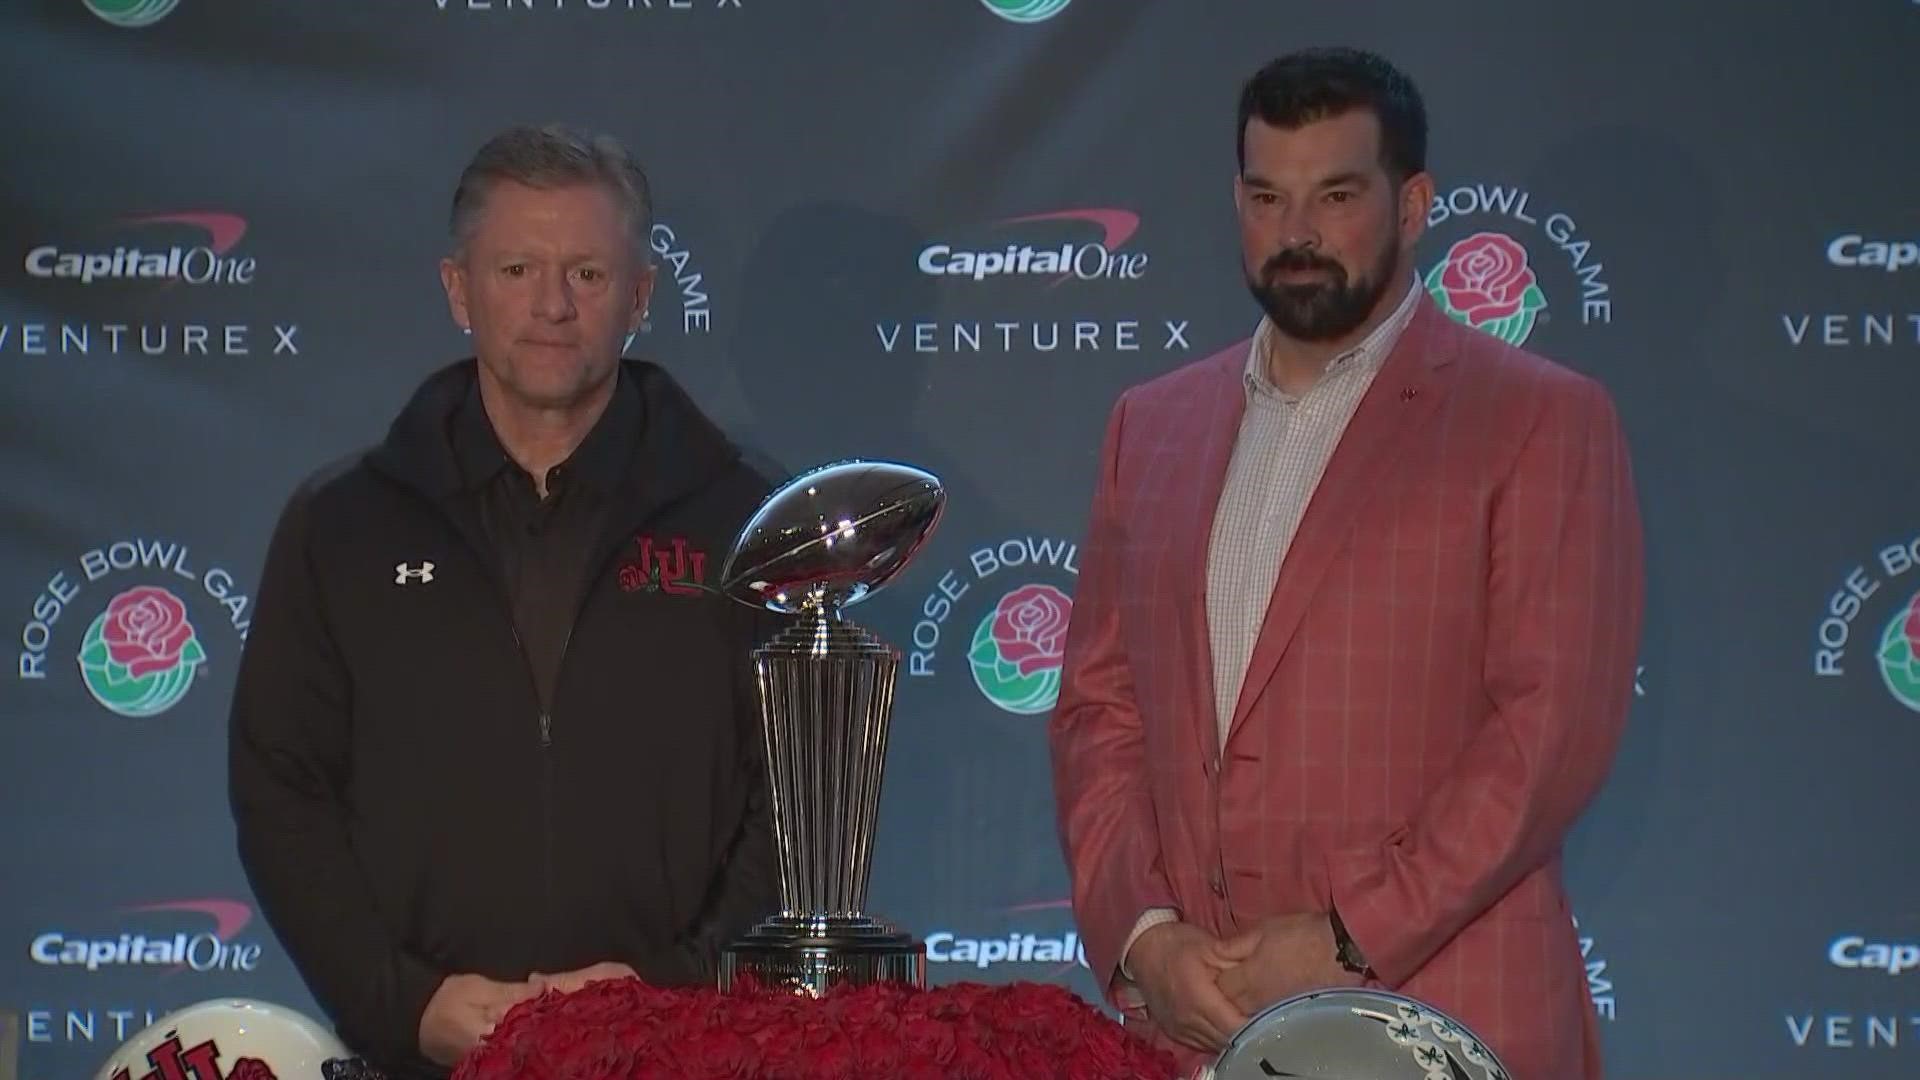 Ohio State head coach Ryan Day and Utah head coach Kyle Whittingham discuss Saturday's Rose Bowl matchup.